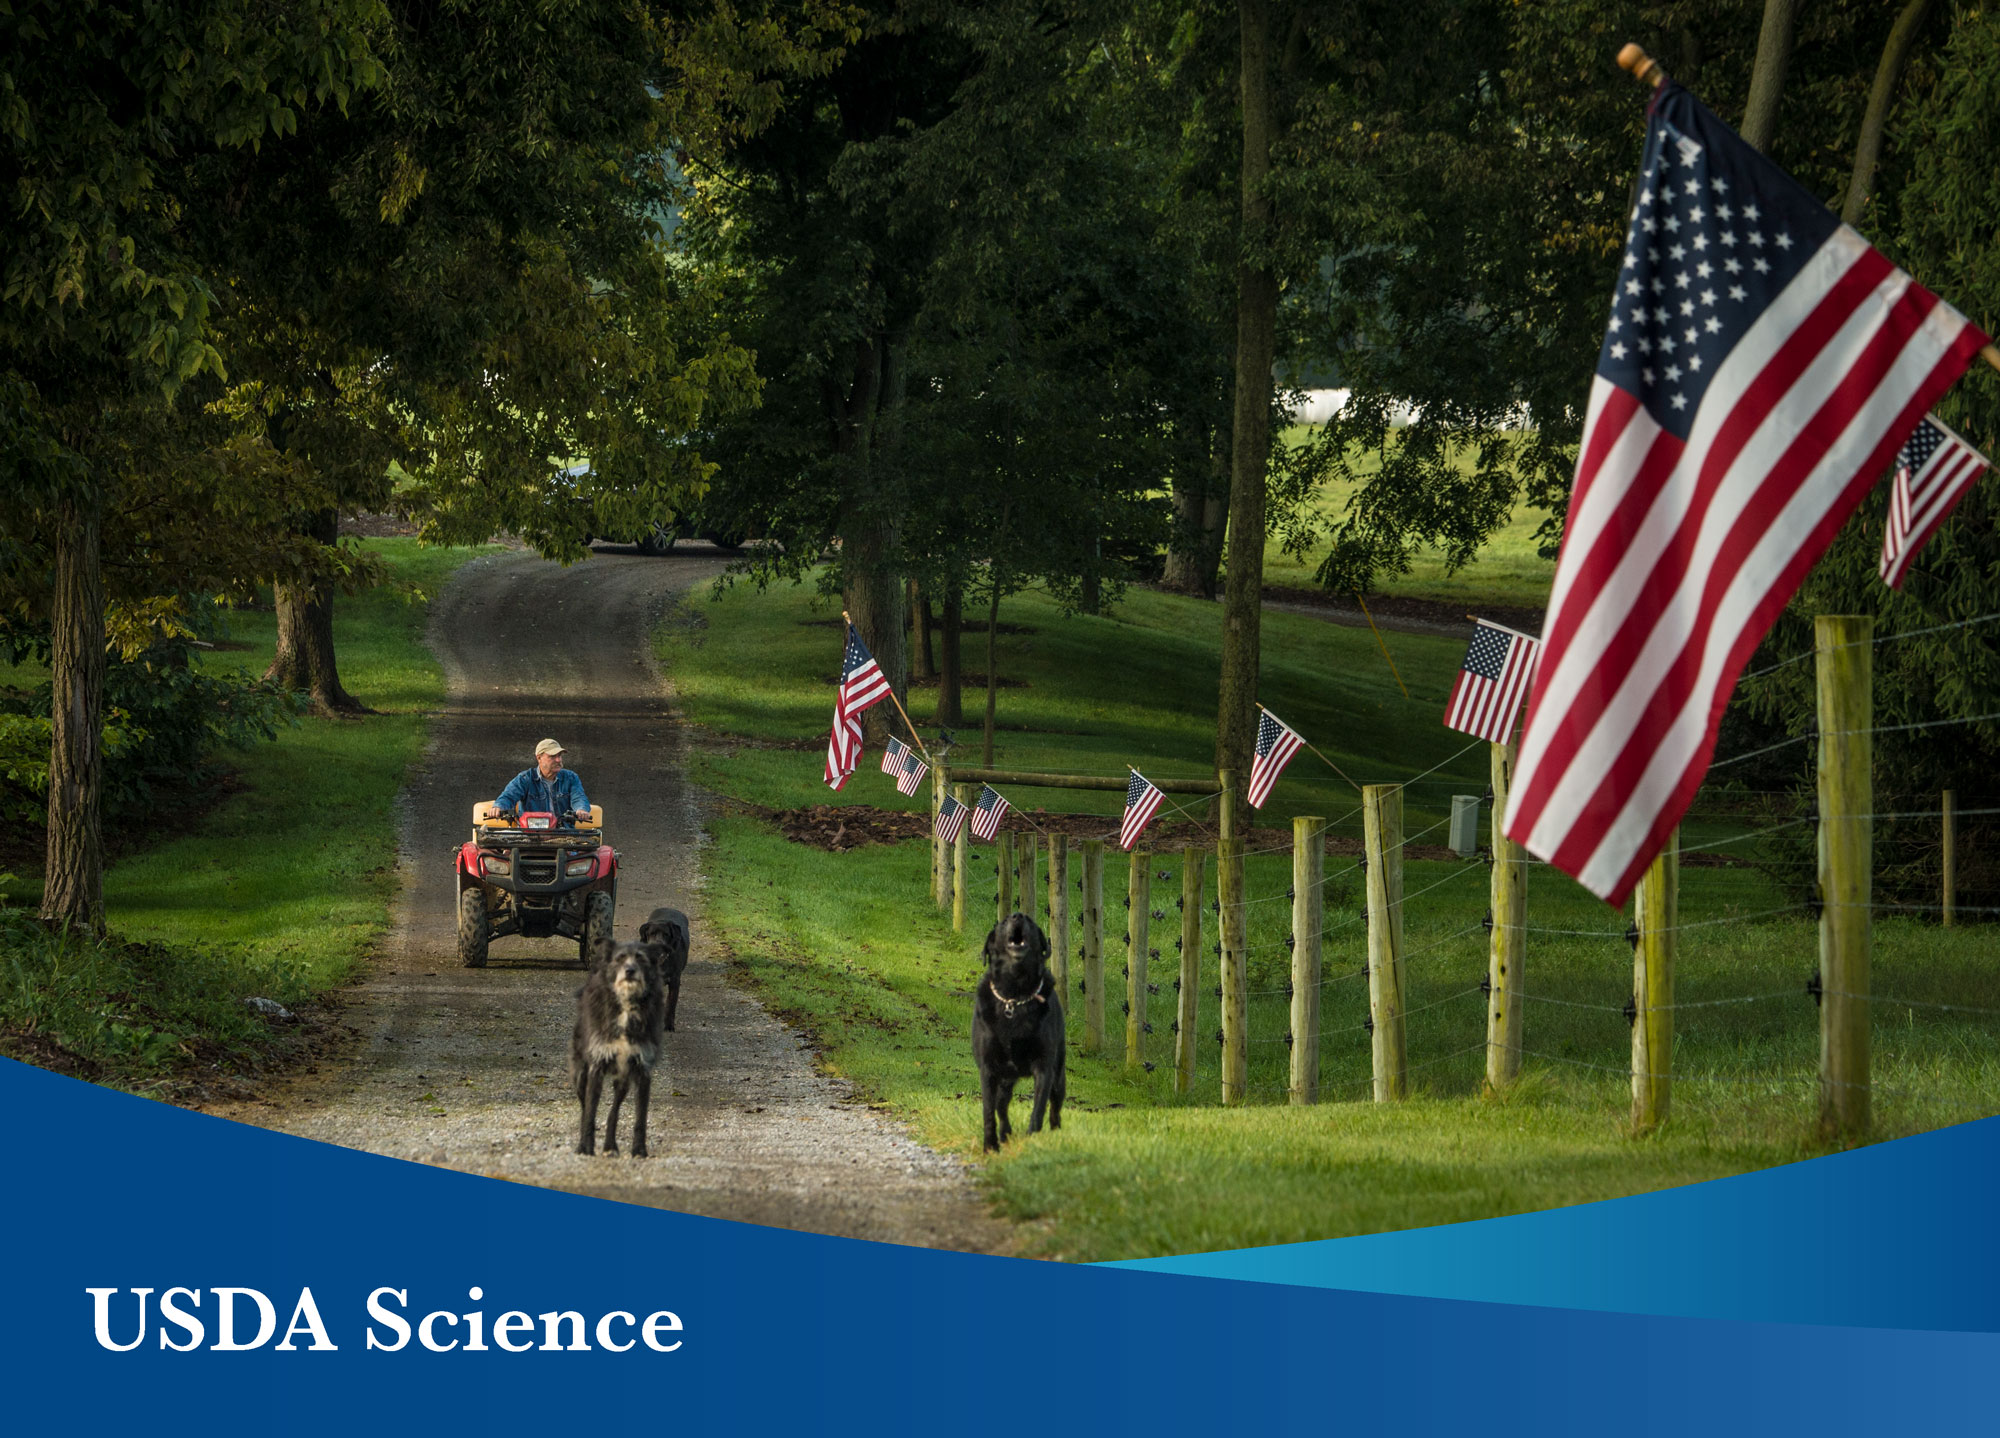 USDA Science text overlay with a man riding a tractor with dogs in front of him beside a row of United States flags on a fence in the woods